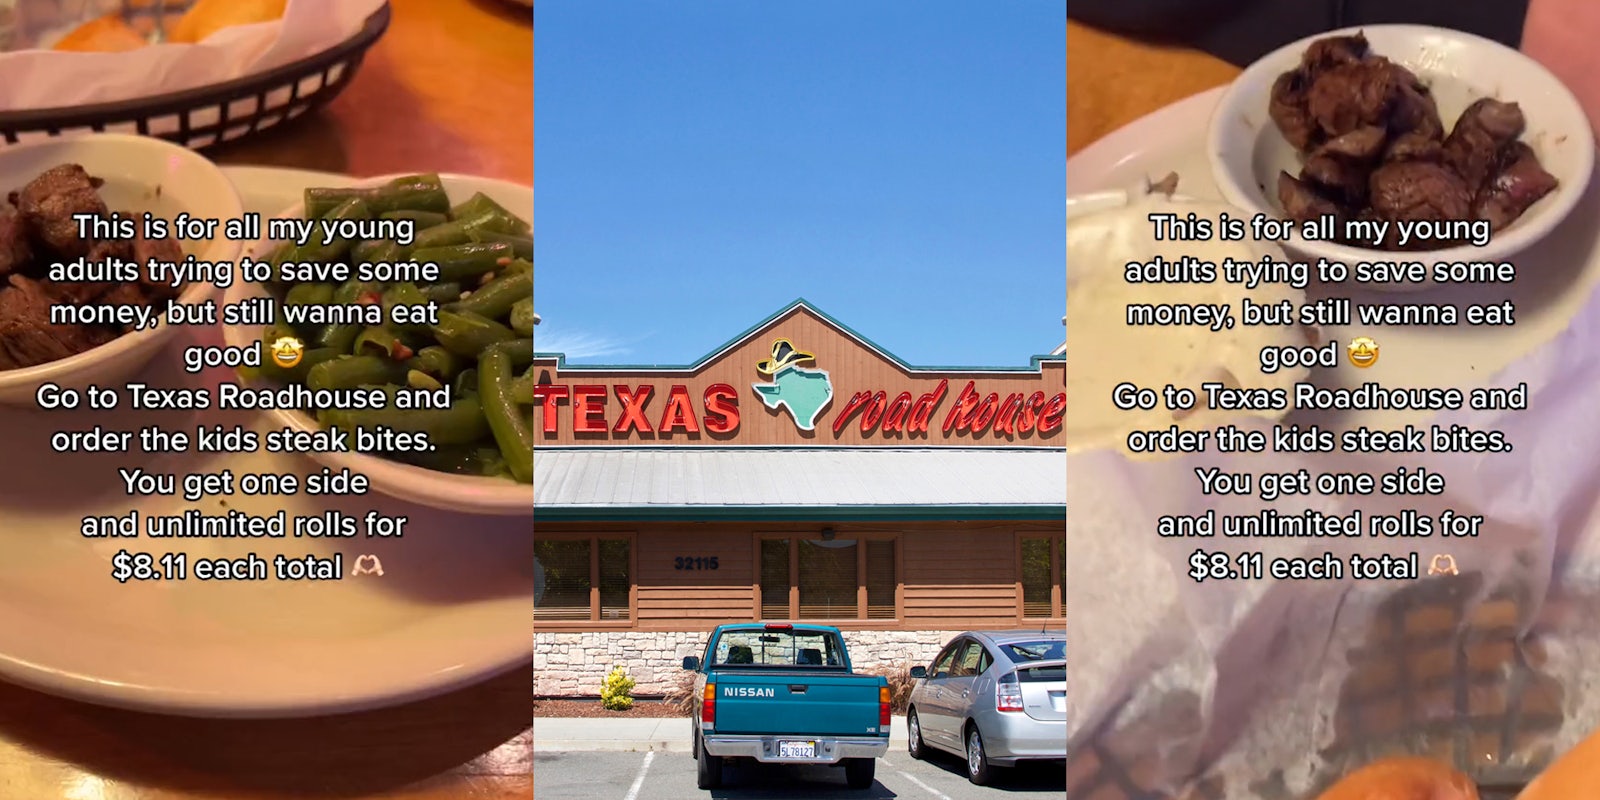 Texas Roadhouse kids steak bites meal on table caption 'This is for all my young adults trying to save some money, but still wanna eat good Go to Texas Roadhouse and order the kids steak bites. You get one side and unlimited rolls for $8.11 each total' (l) Texas Roadhouse sign on building with parking lot (c) Texas Roadhouse kids steak bites meal on table caption 'This is for all my young adults trying to save some money, but still wanna eat good Go to Texas Roadhouse and order the kids steak bites. You get one side and unlimited rolls for $8.11 each total' (r)